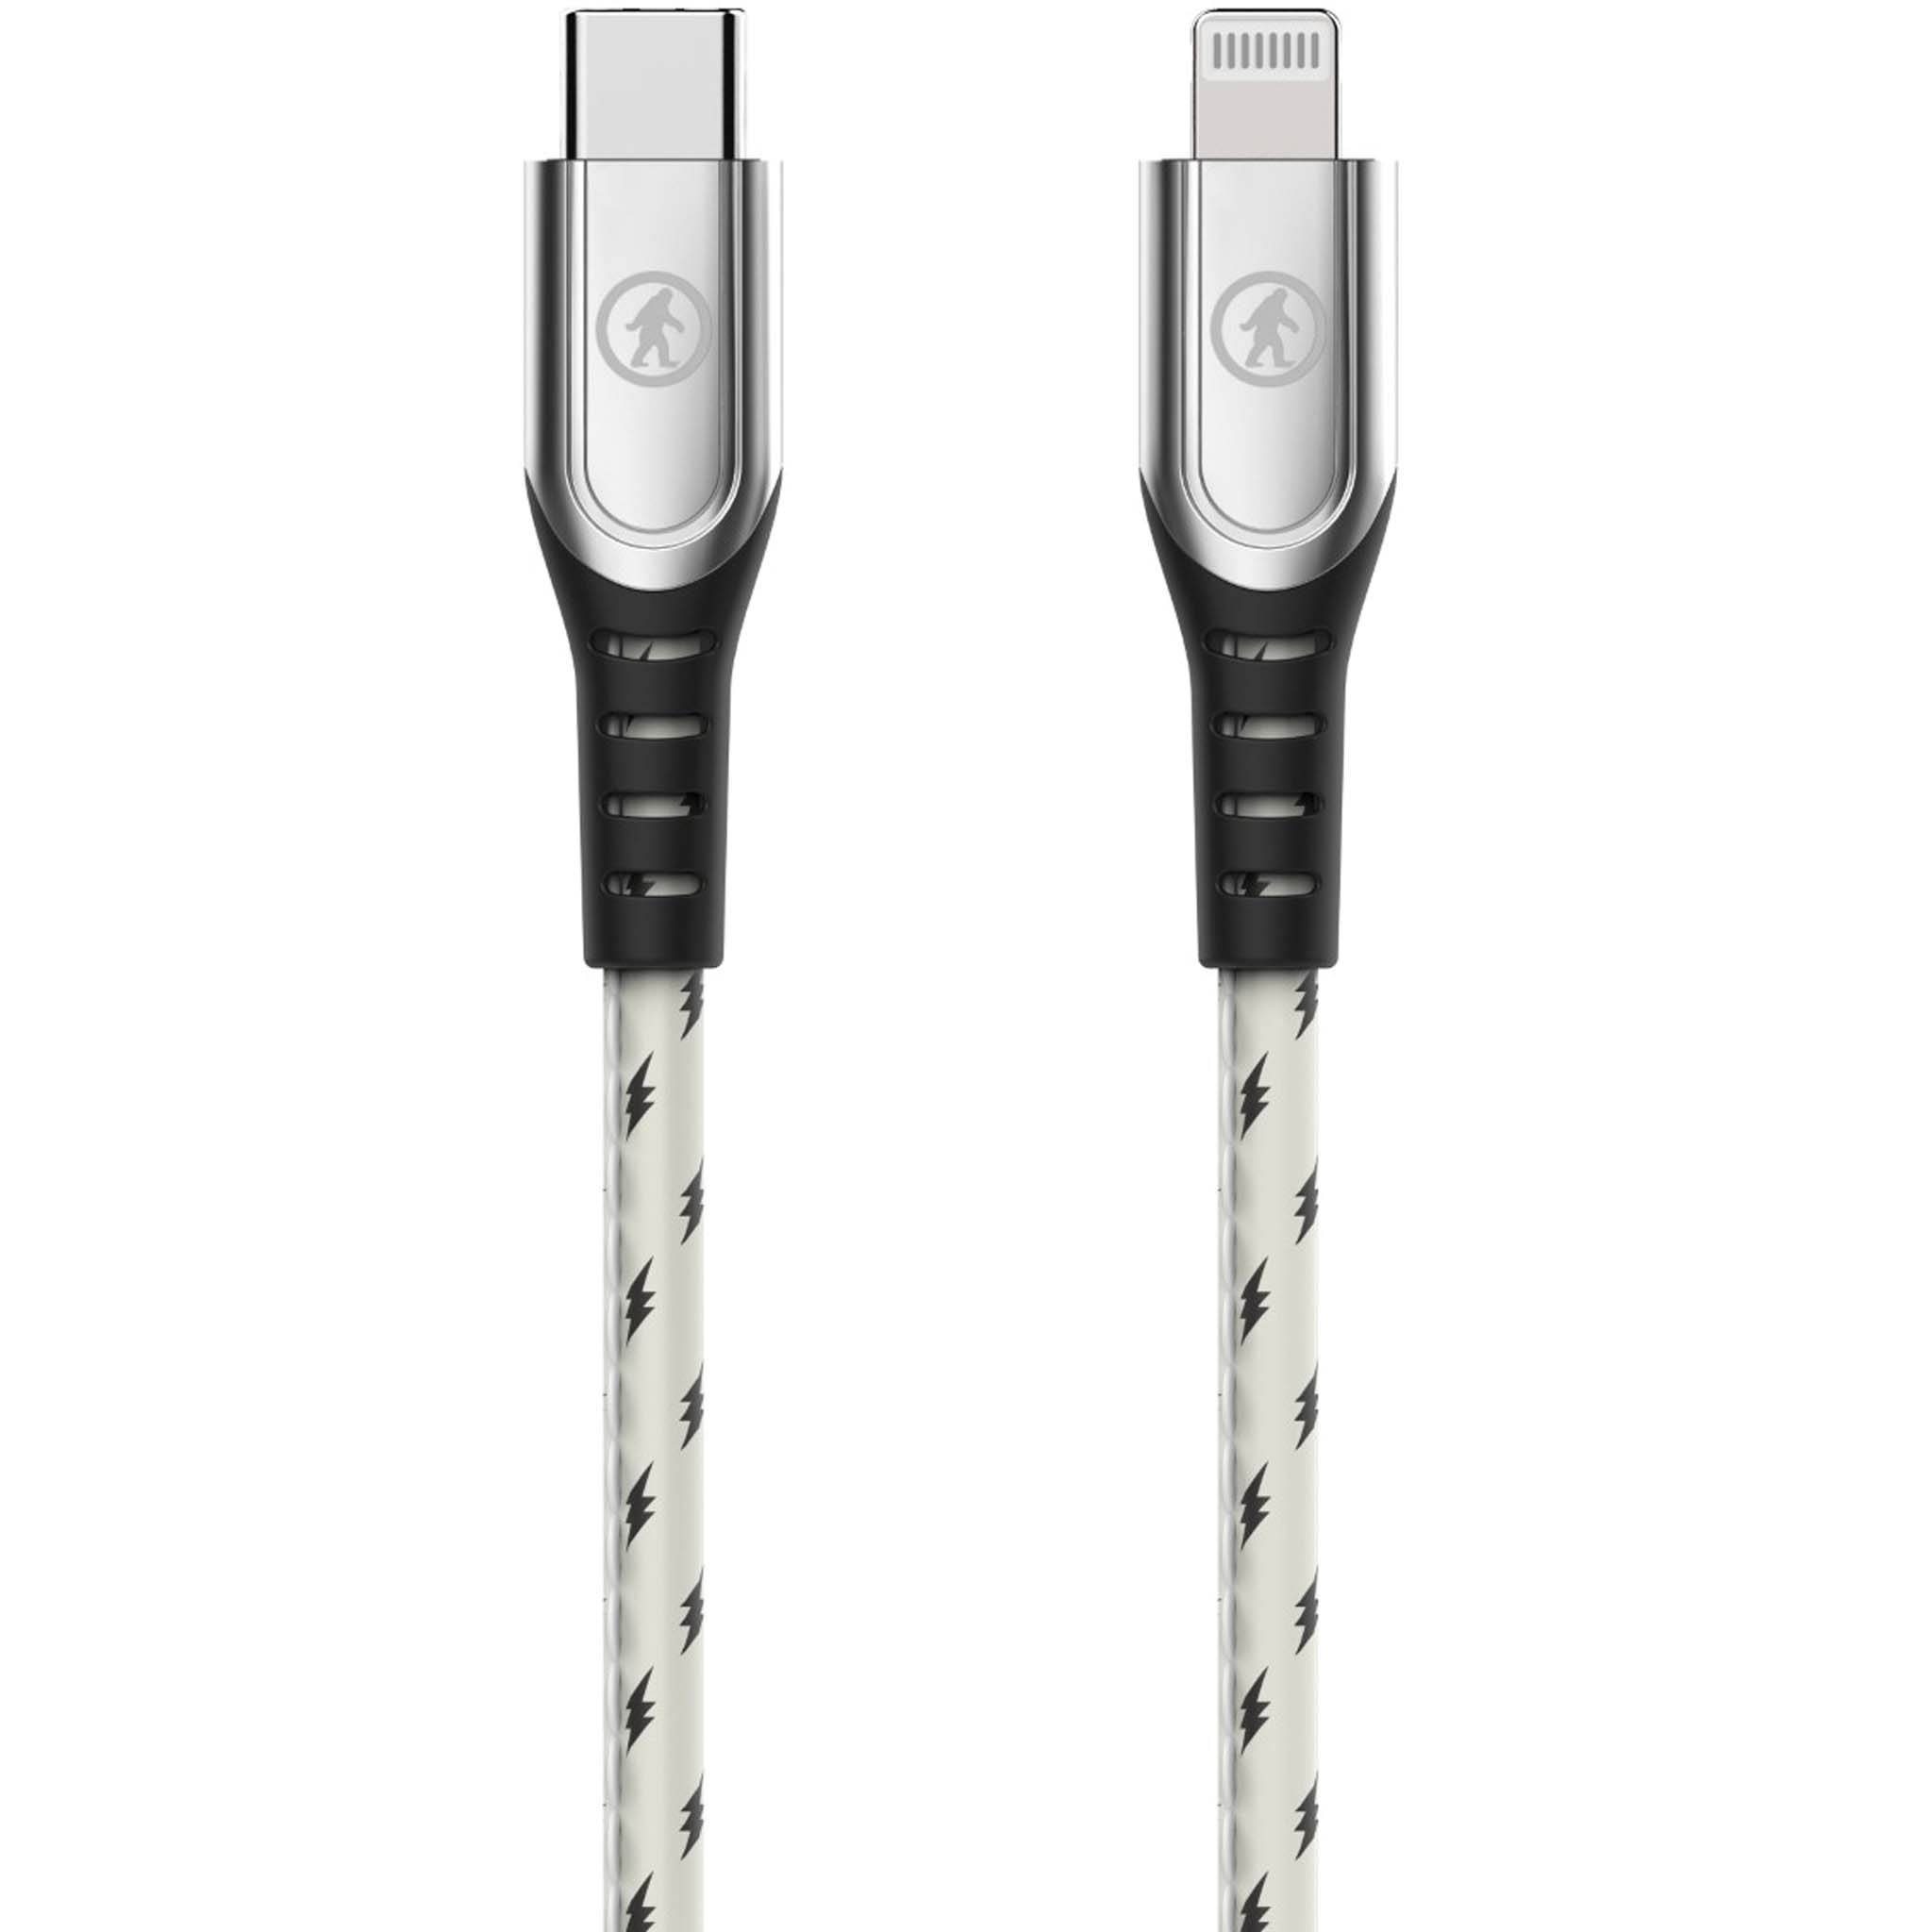 Firefly Plus Glow-in-the-Dark Cable